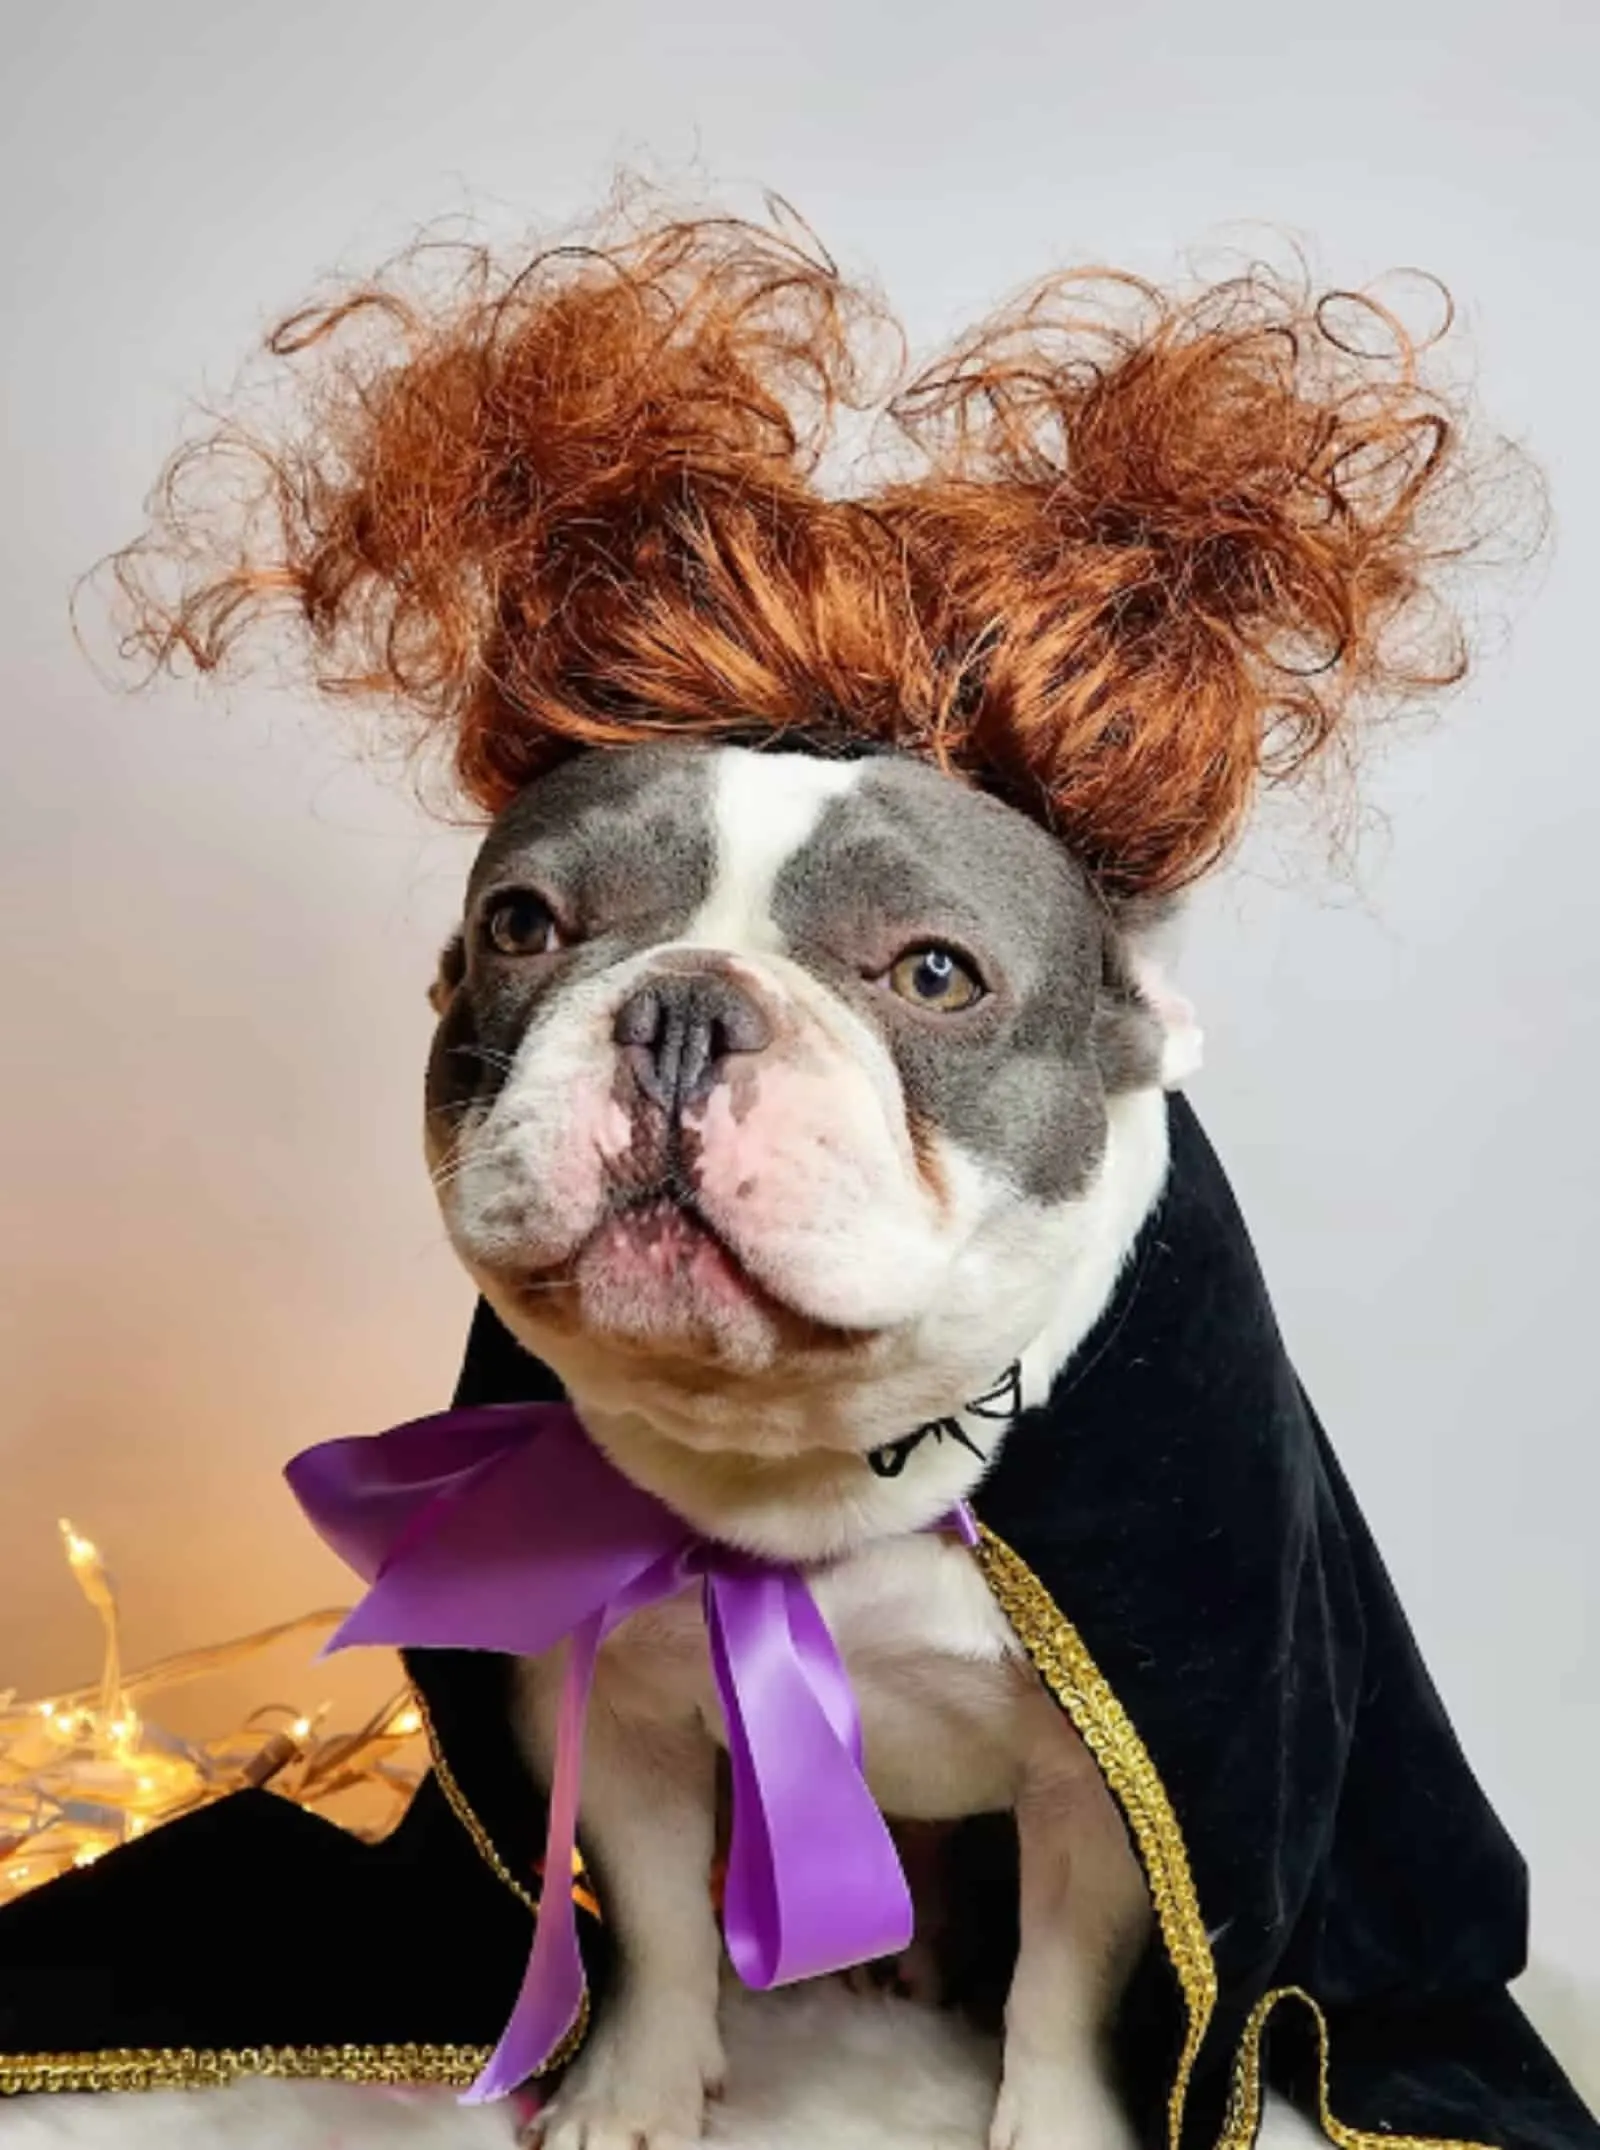 dog wearing Winifred Sanderson costume posing for camera